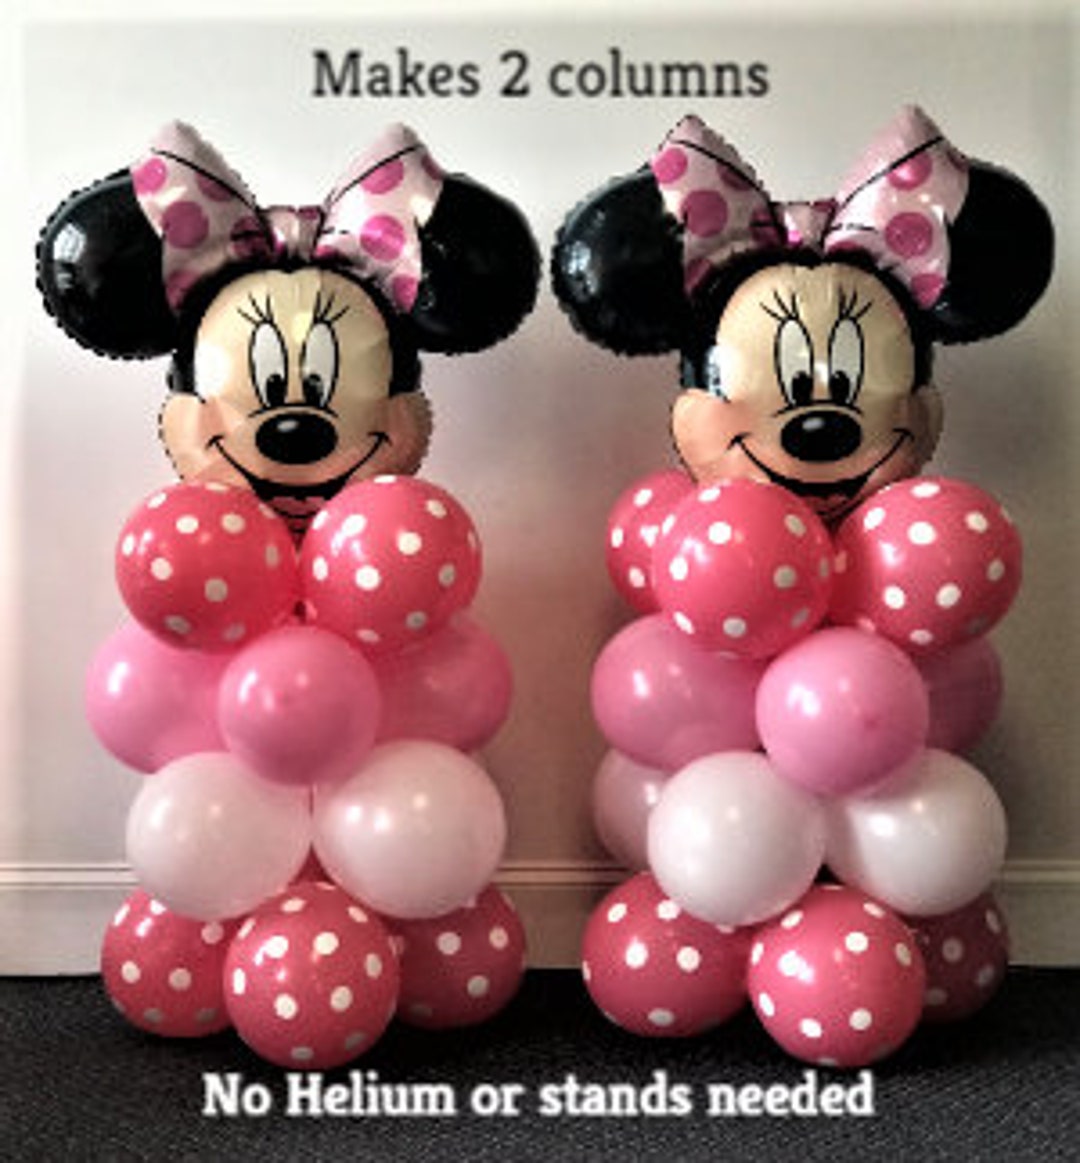 Mickey Mouse Party Decoration Baby Shower Kids Birthday Party Disposable Party  Supplies Mickey Minnie Cake Decor - Price history & Review, AliExpress  Seller - C party Store